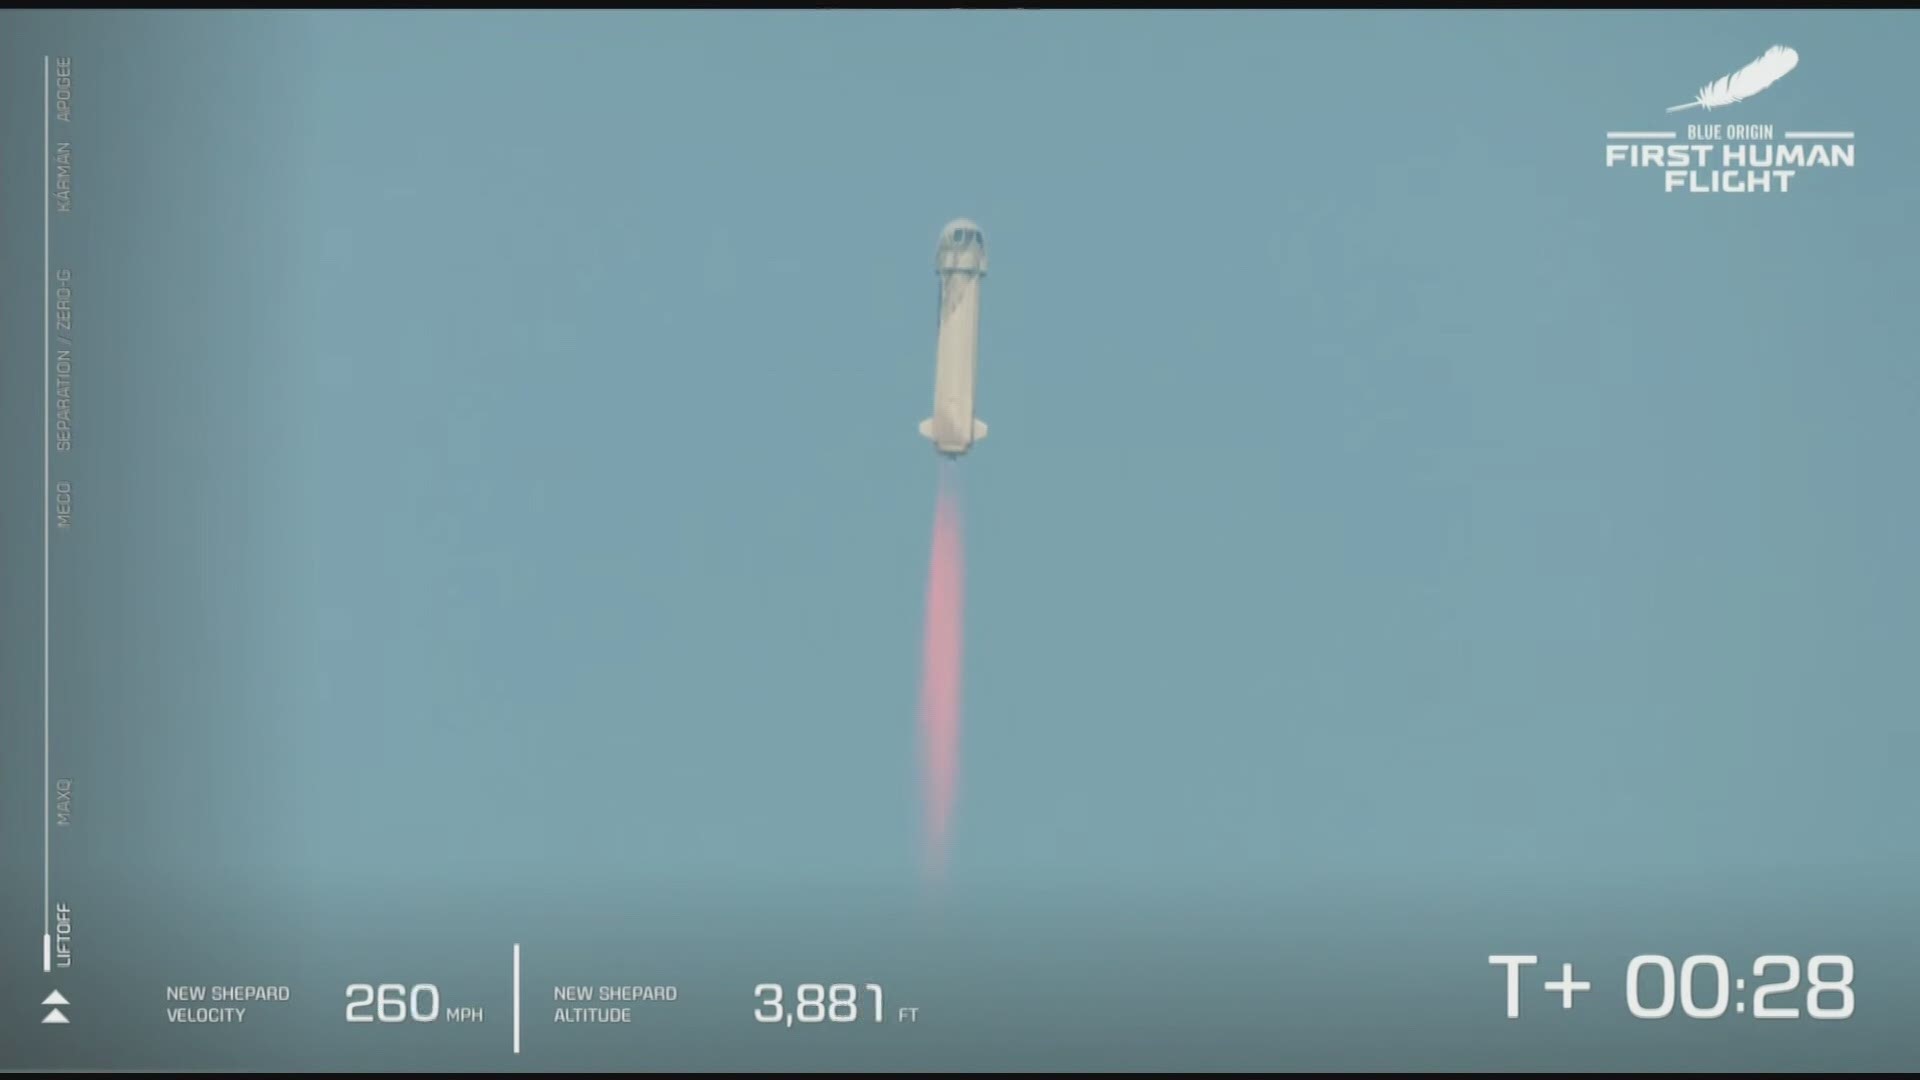 The Blue Origin launch placed Van Horn on the map.